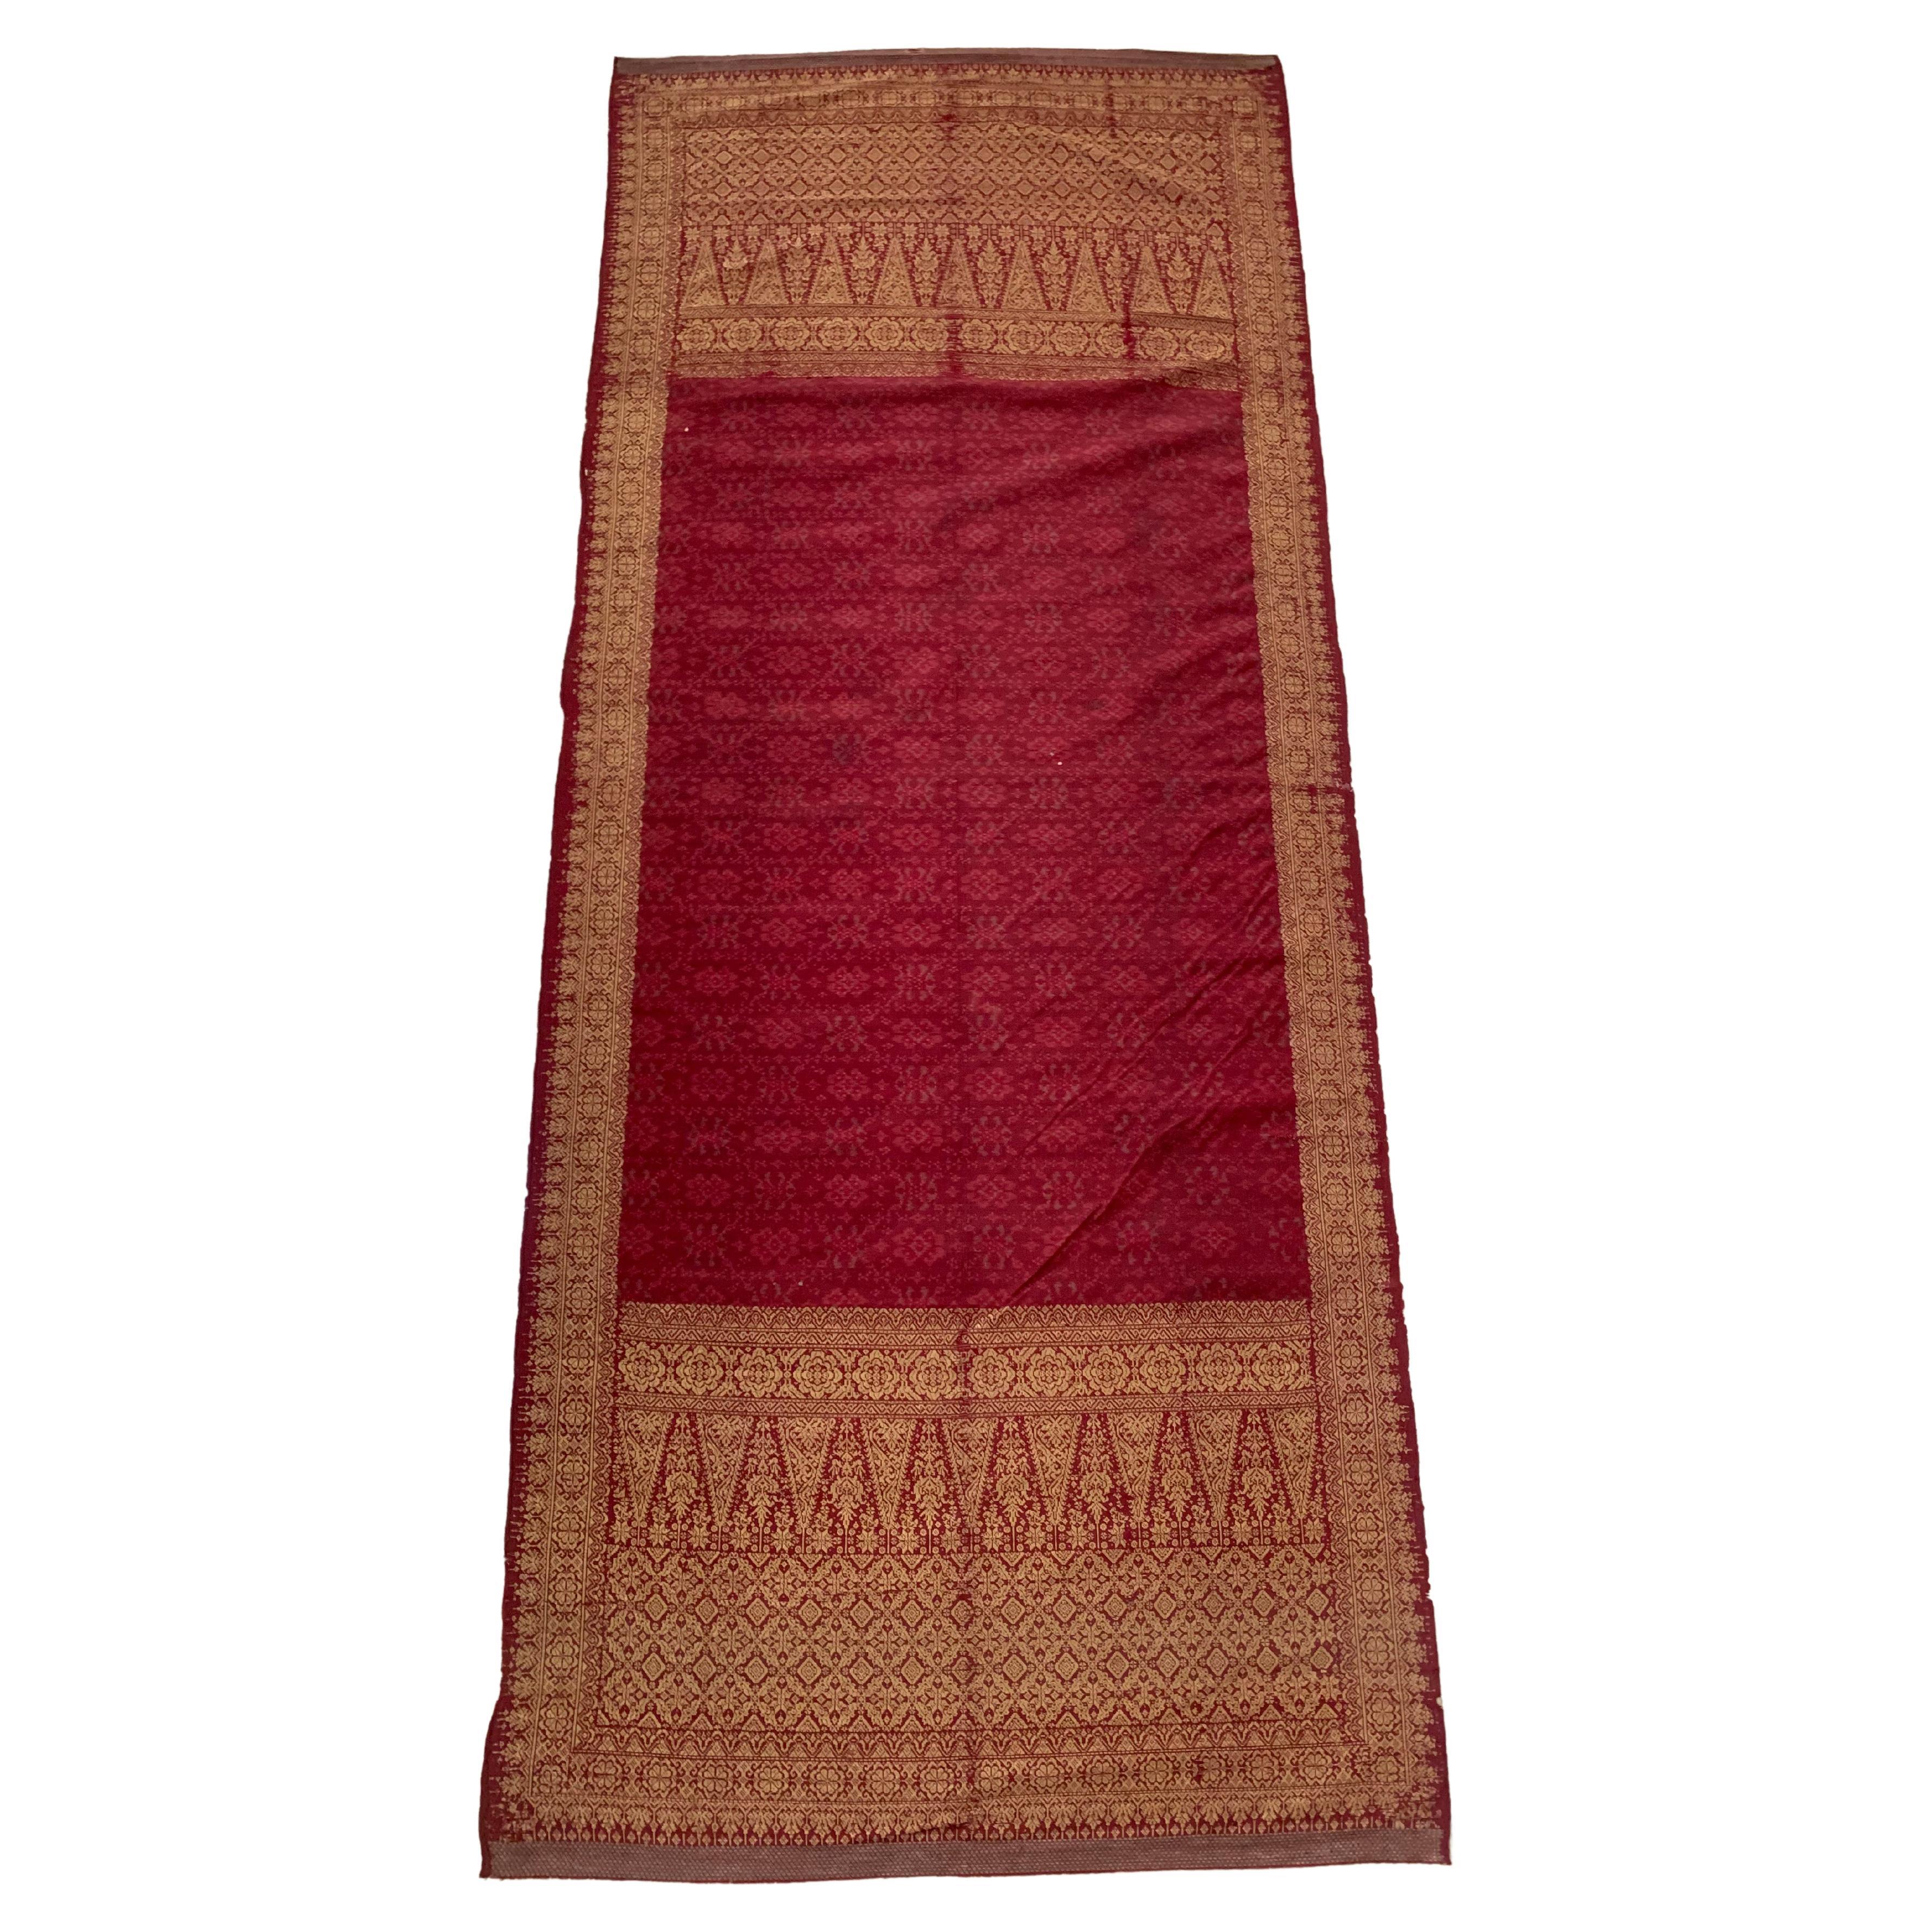 Ceremonial Silk Ikat from Sumatra with Stunning Motifs and Gold Leaf Detail